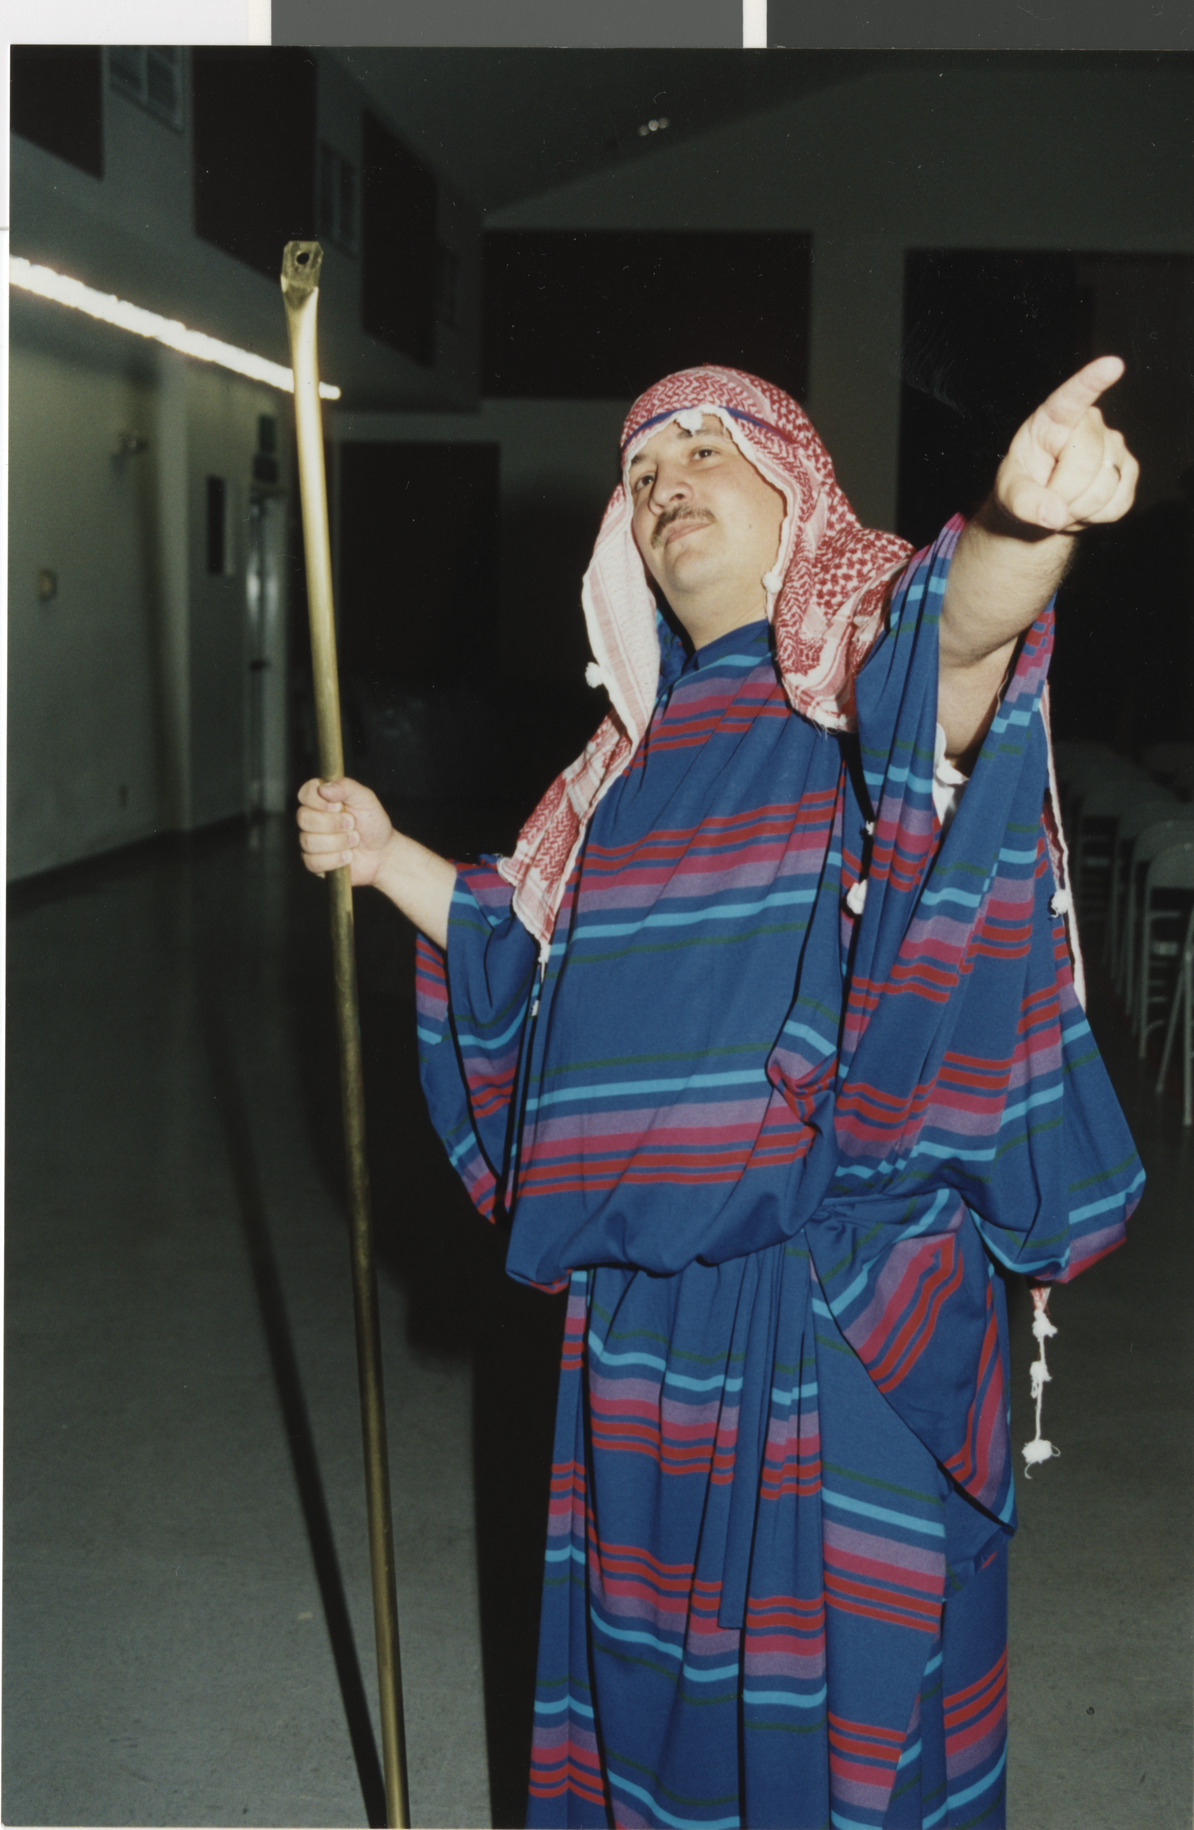 Photograph of man dressed as Moses, 1990s